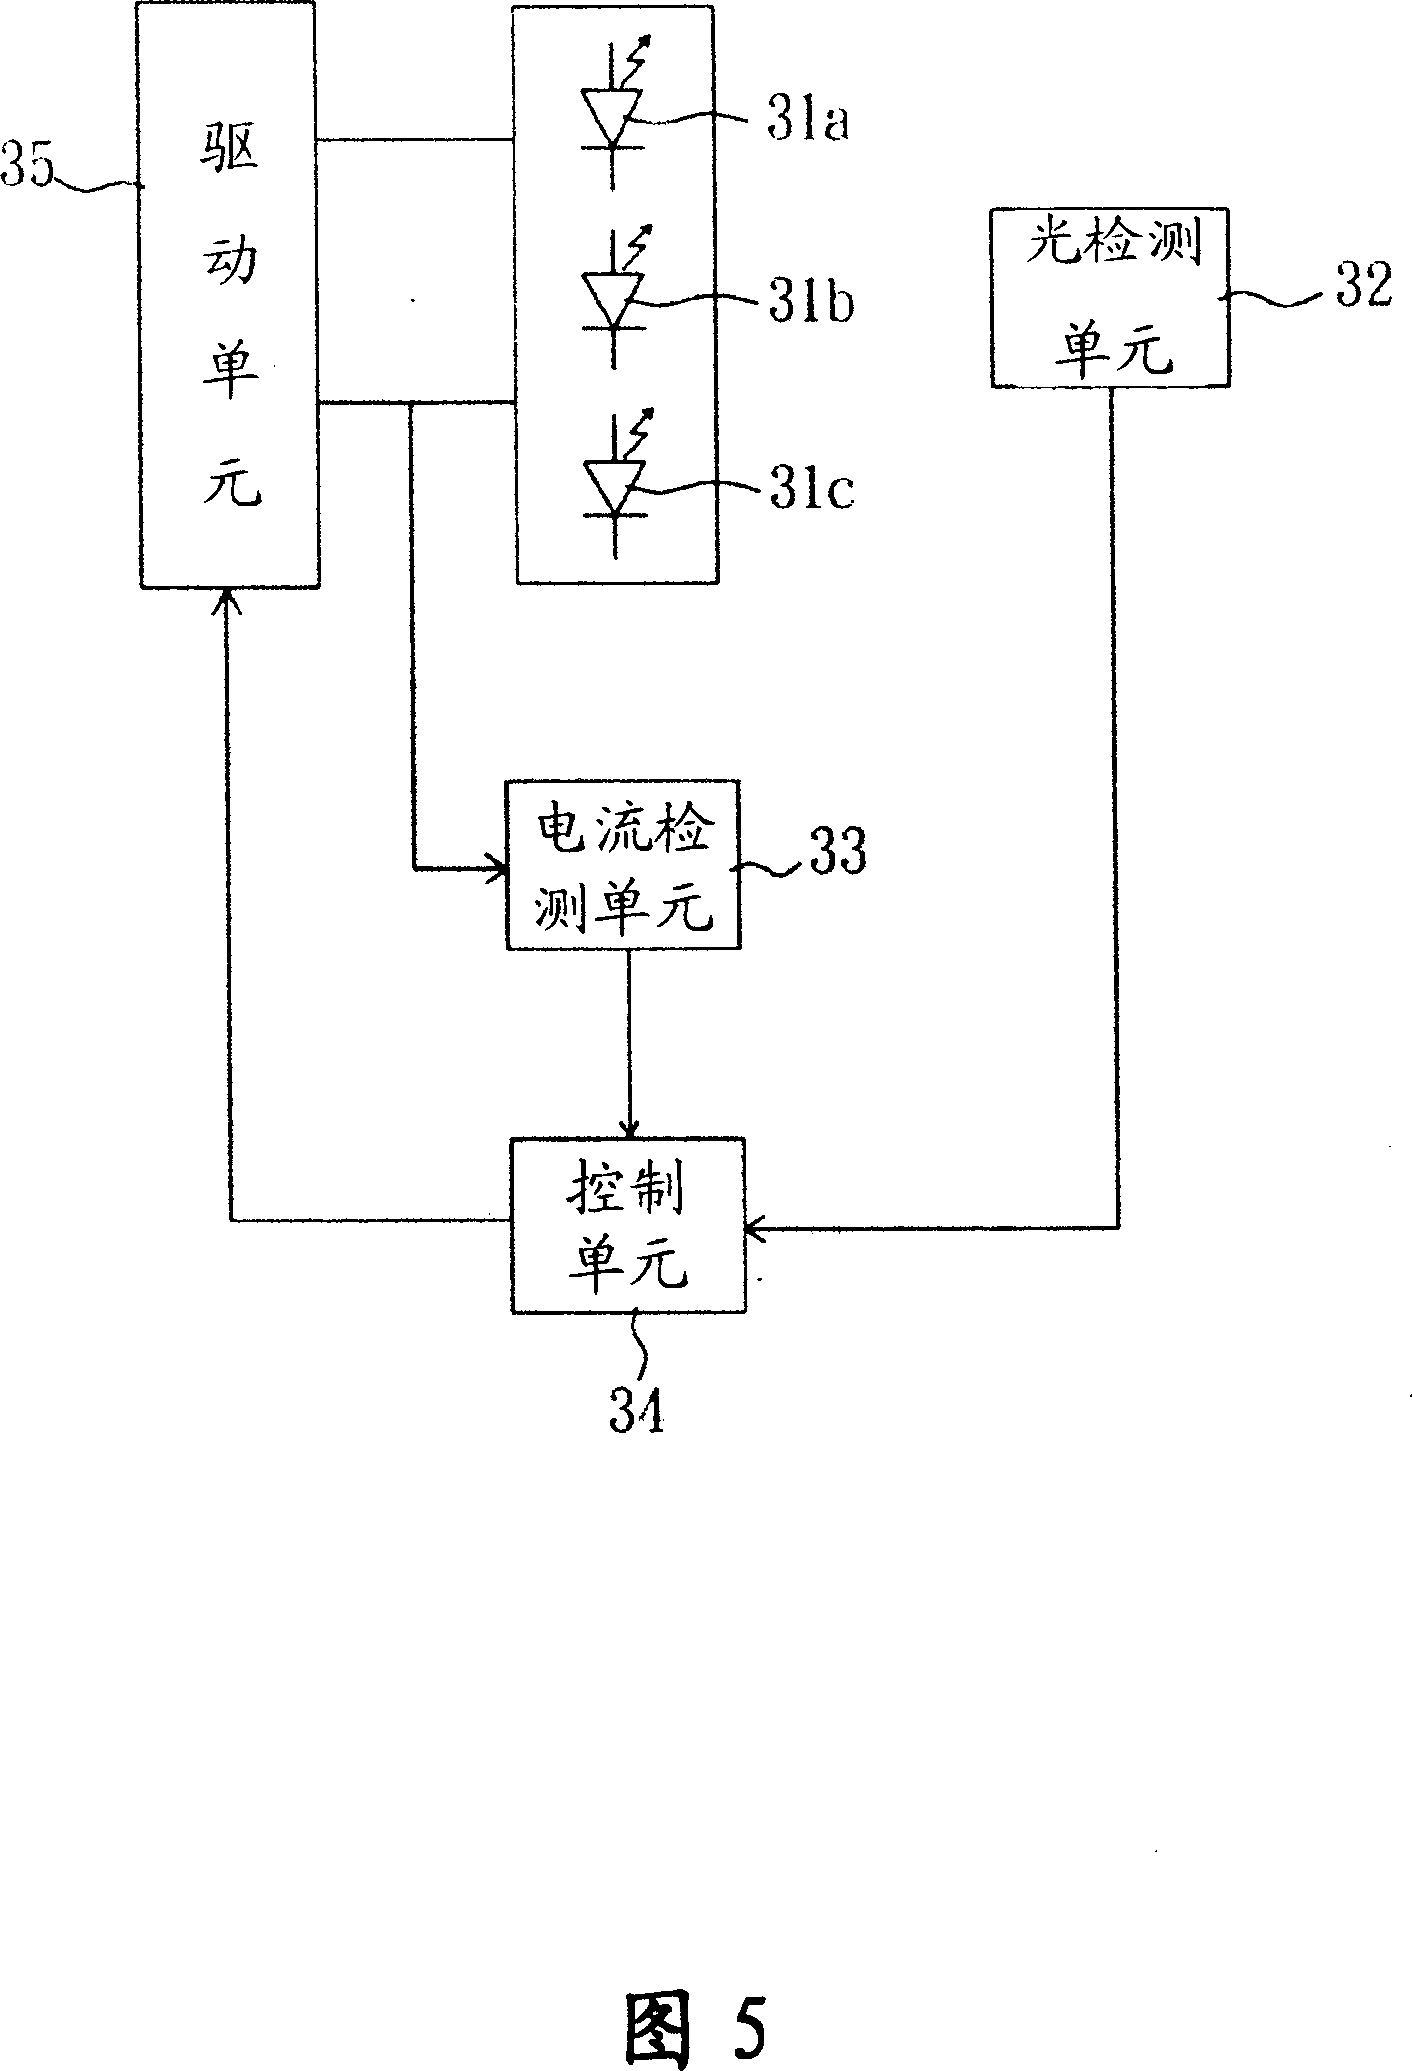 Detecting and control method for luminous module group